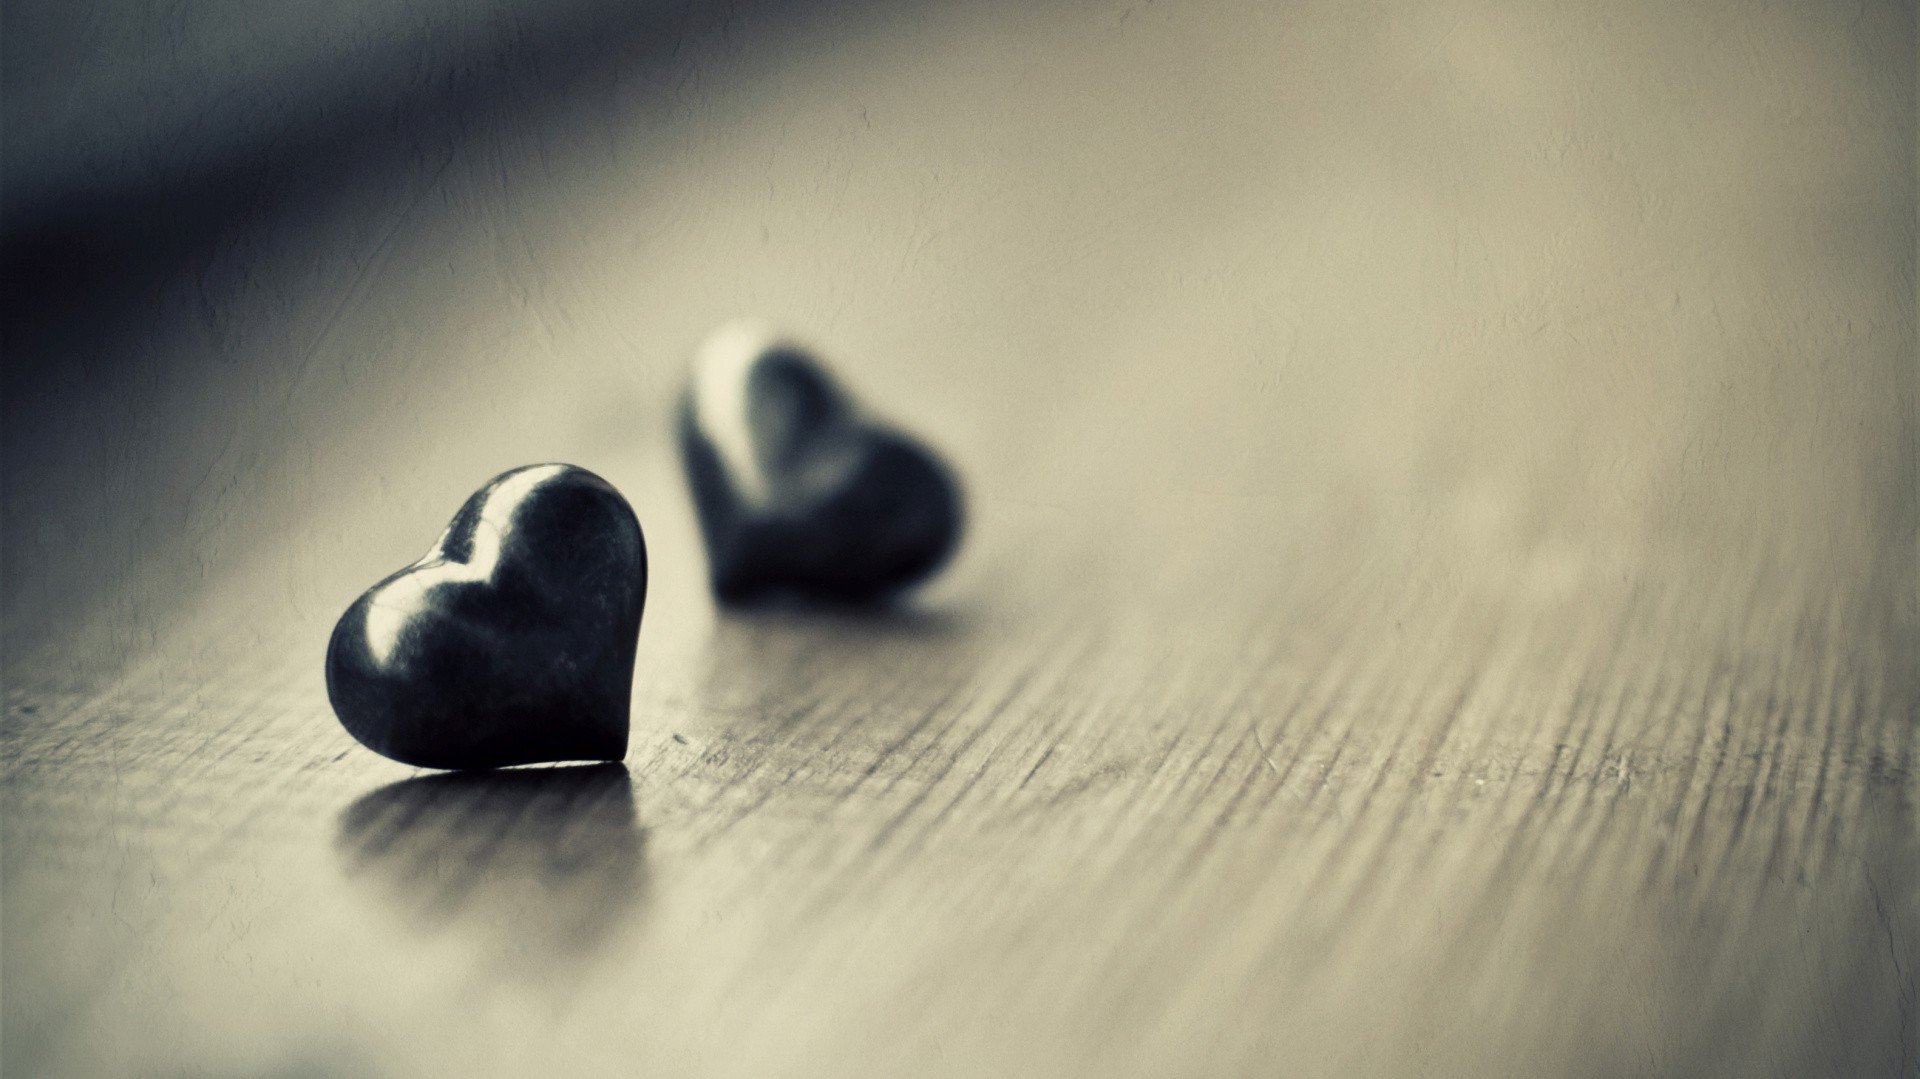 Two black hearts sitting on a wooden table - Black heart